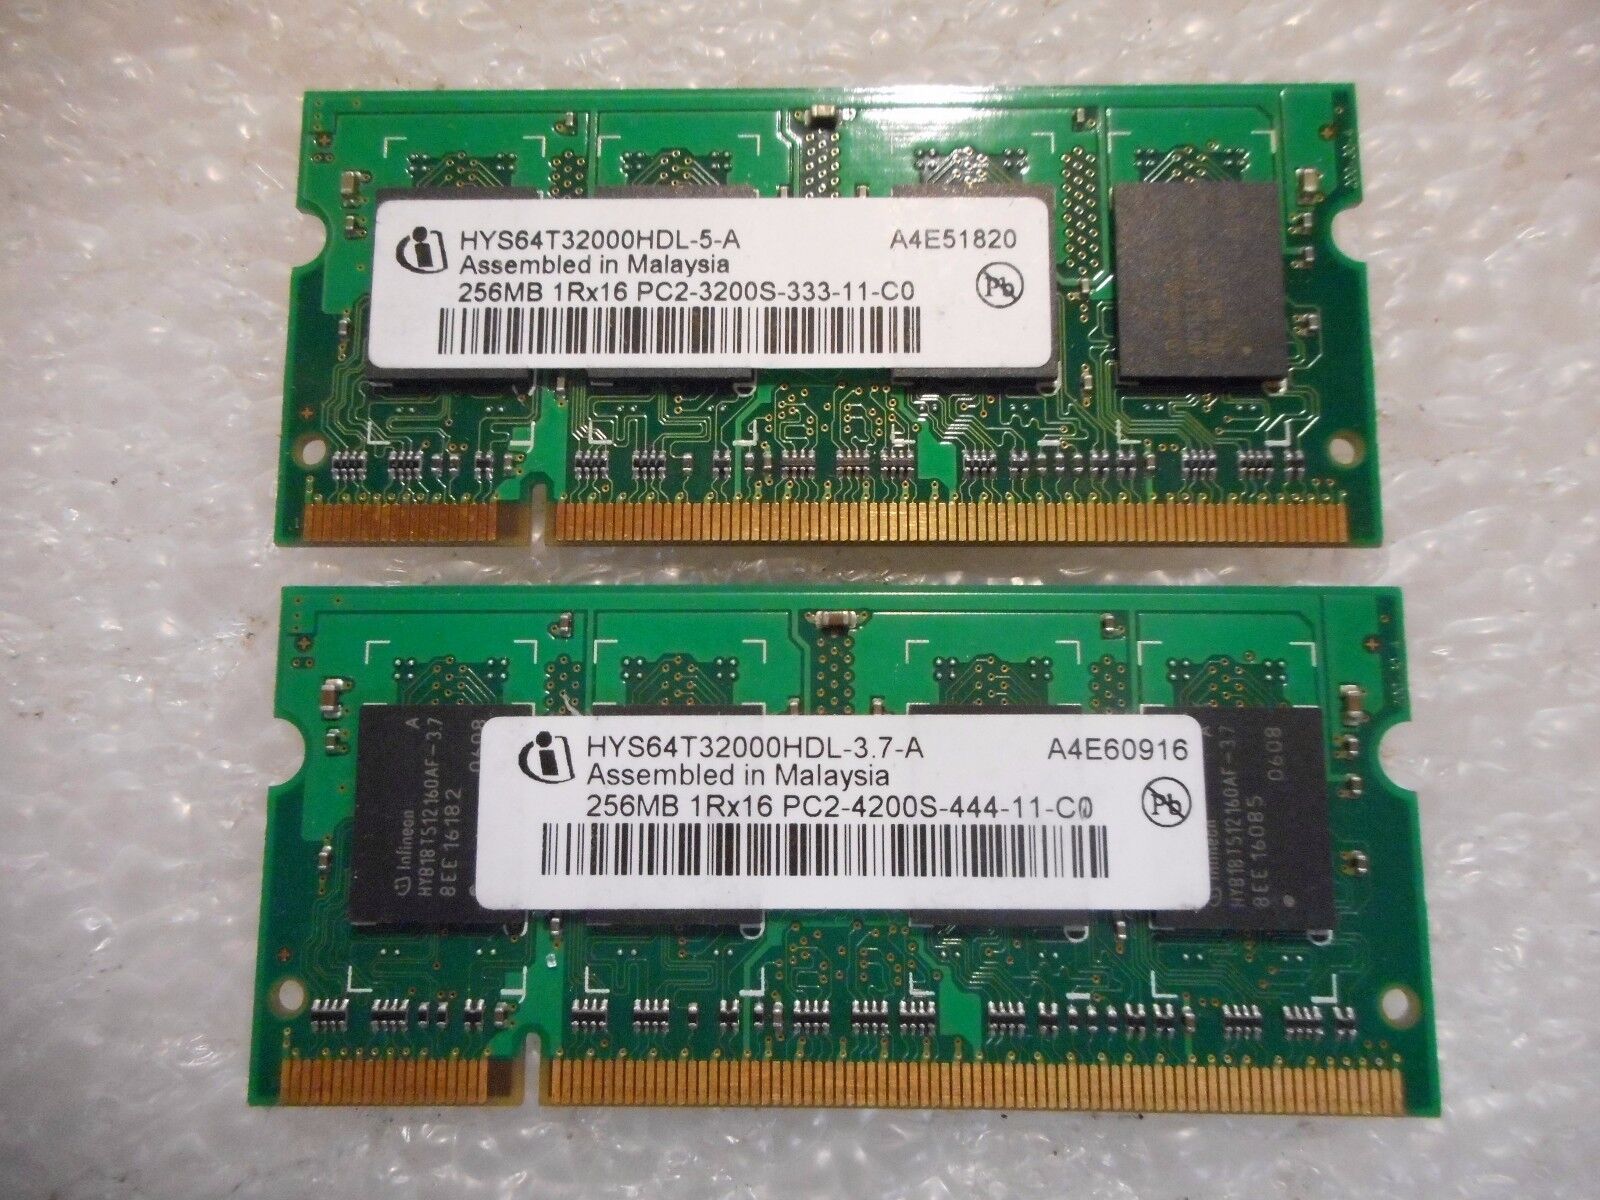 Infineon 512MB (2x256MB) PC2-4200S Laptop Memory 200 Pins HYS64T32000HDL 